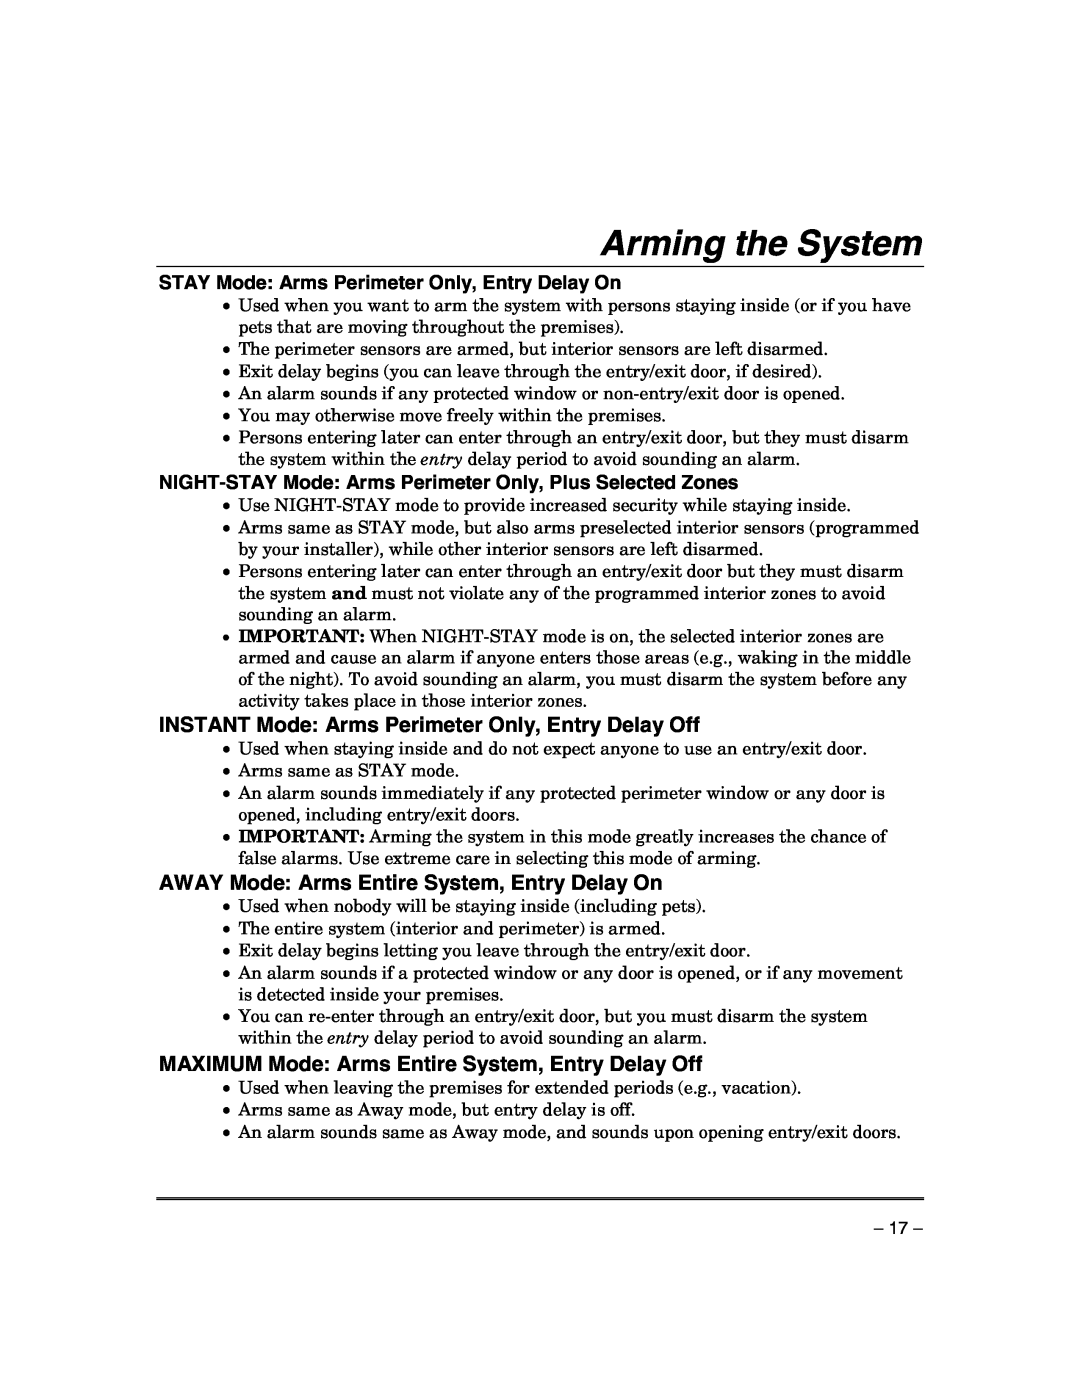 Honeywell VISTA-21IPSIA manual Arming the System, AWAY Mode Arms Entire System, Entry Delay On 